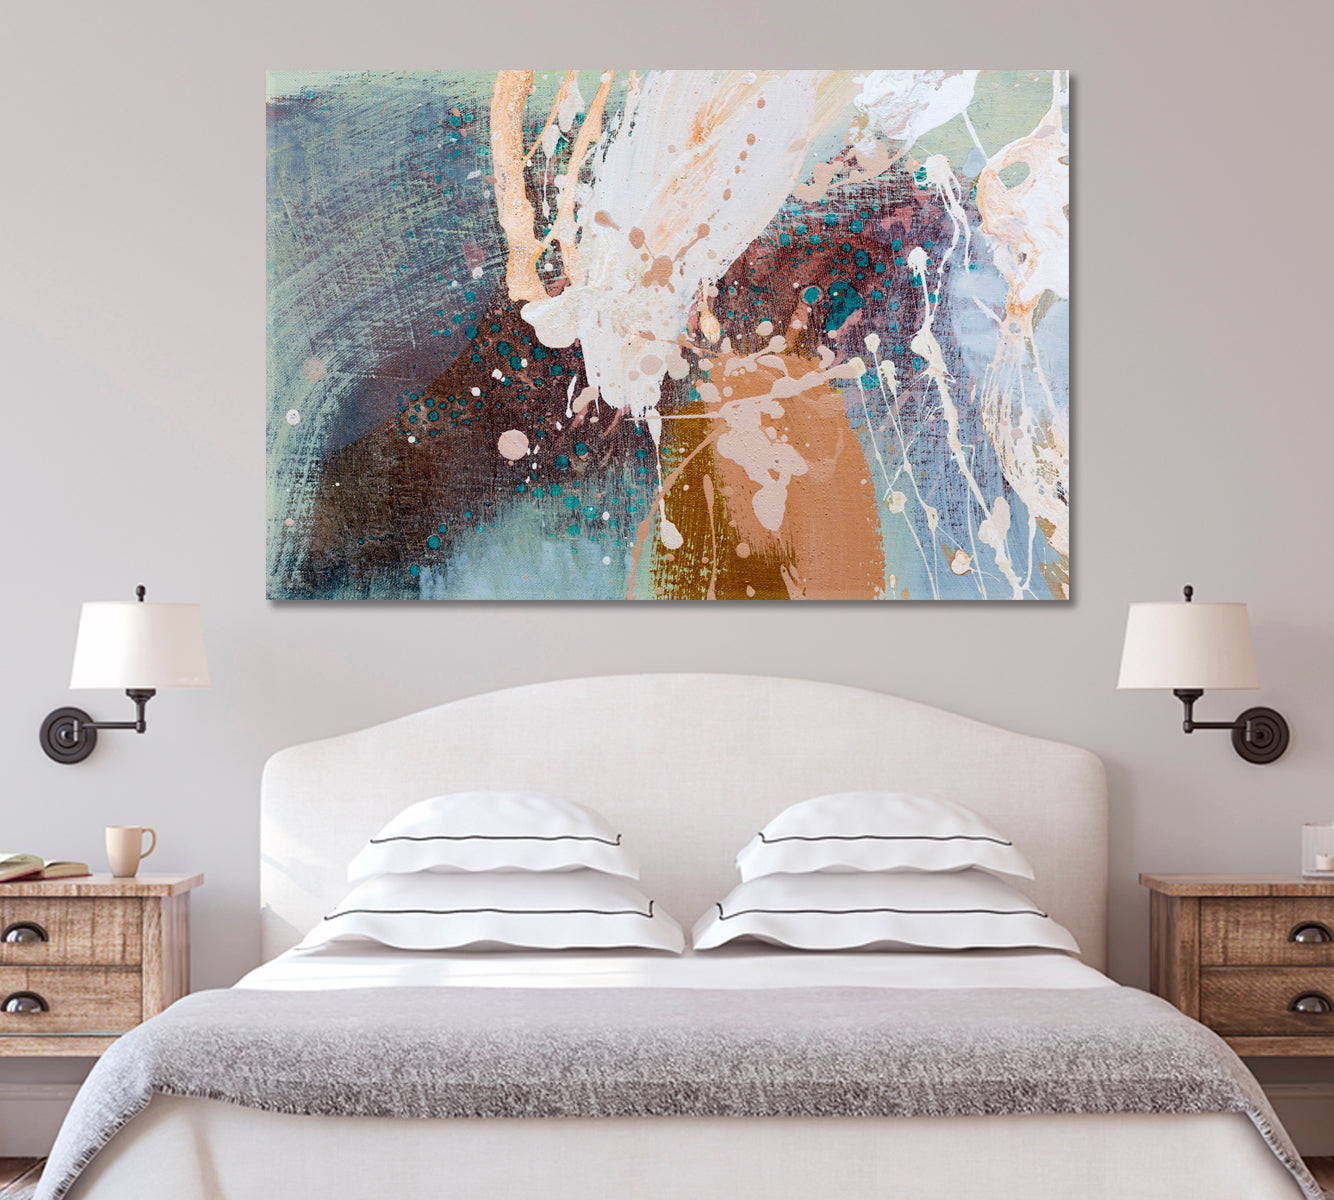 Abstract Brush Strokes in Pastel Colors Canvas Print-Artwork-CetArt-1 Panel-24x16 inches-CetArt